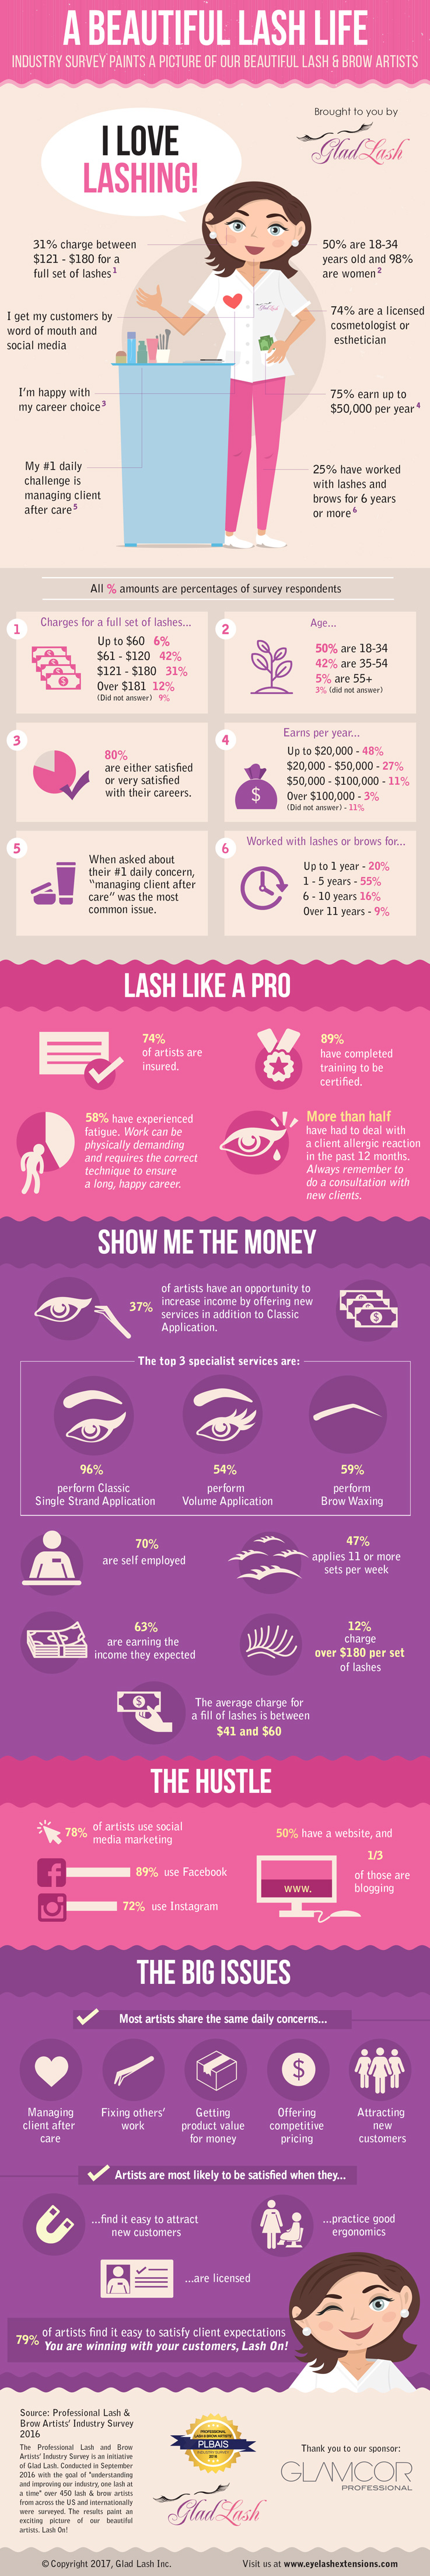 Beautiful Lash Life Infographic - Industry Survey Results